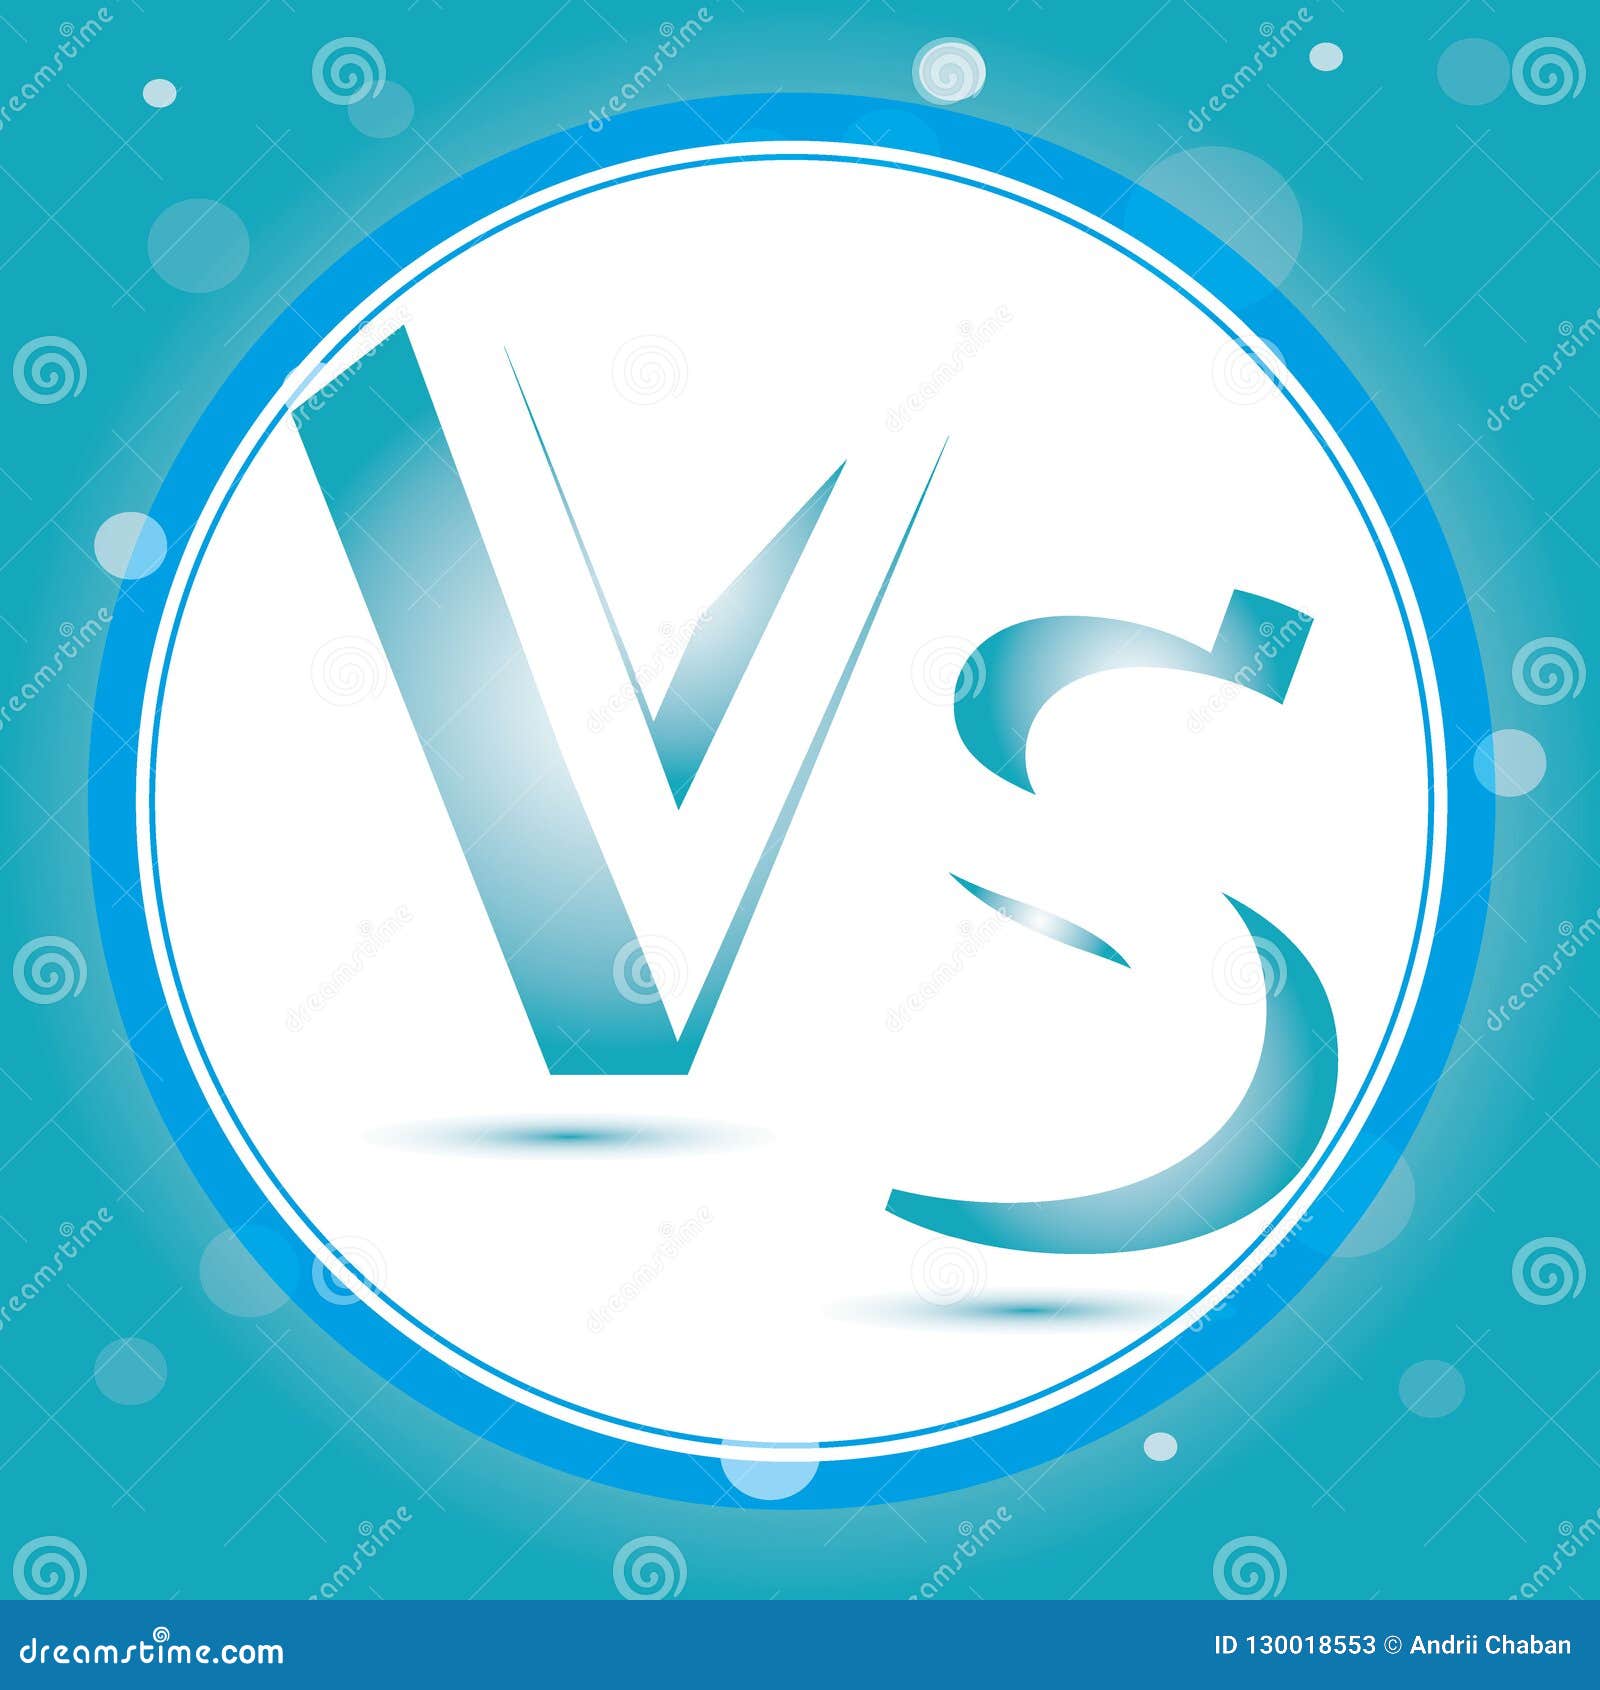 Versus Logo. VS Vector Letters Illustration. Competition Icon. Fight